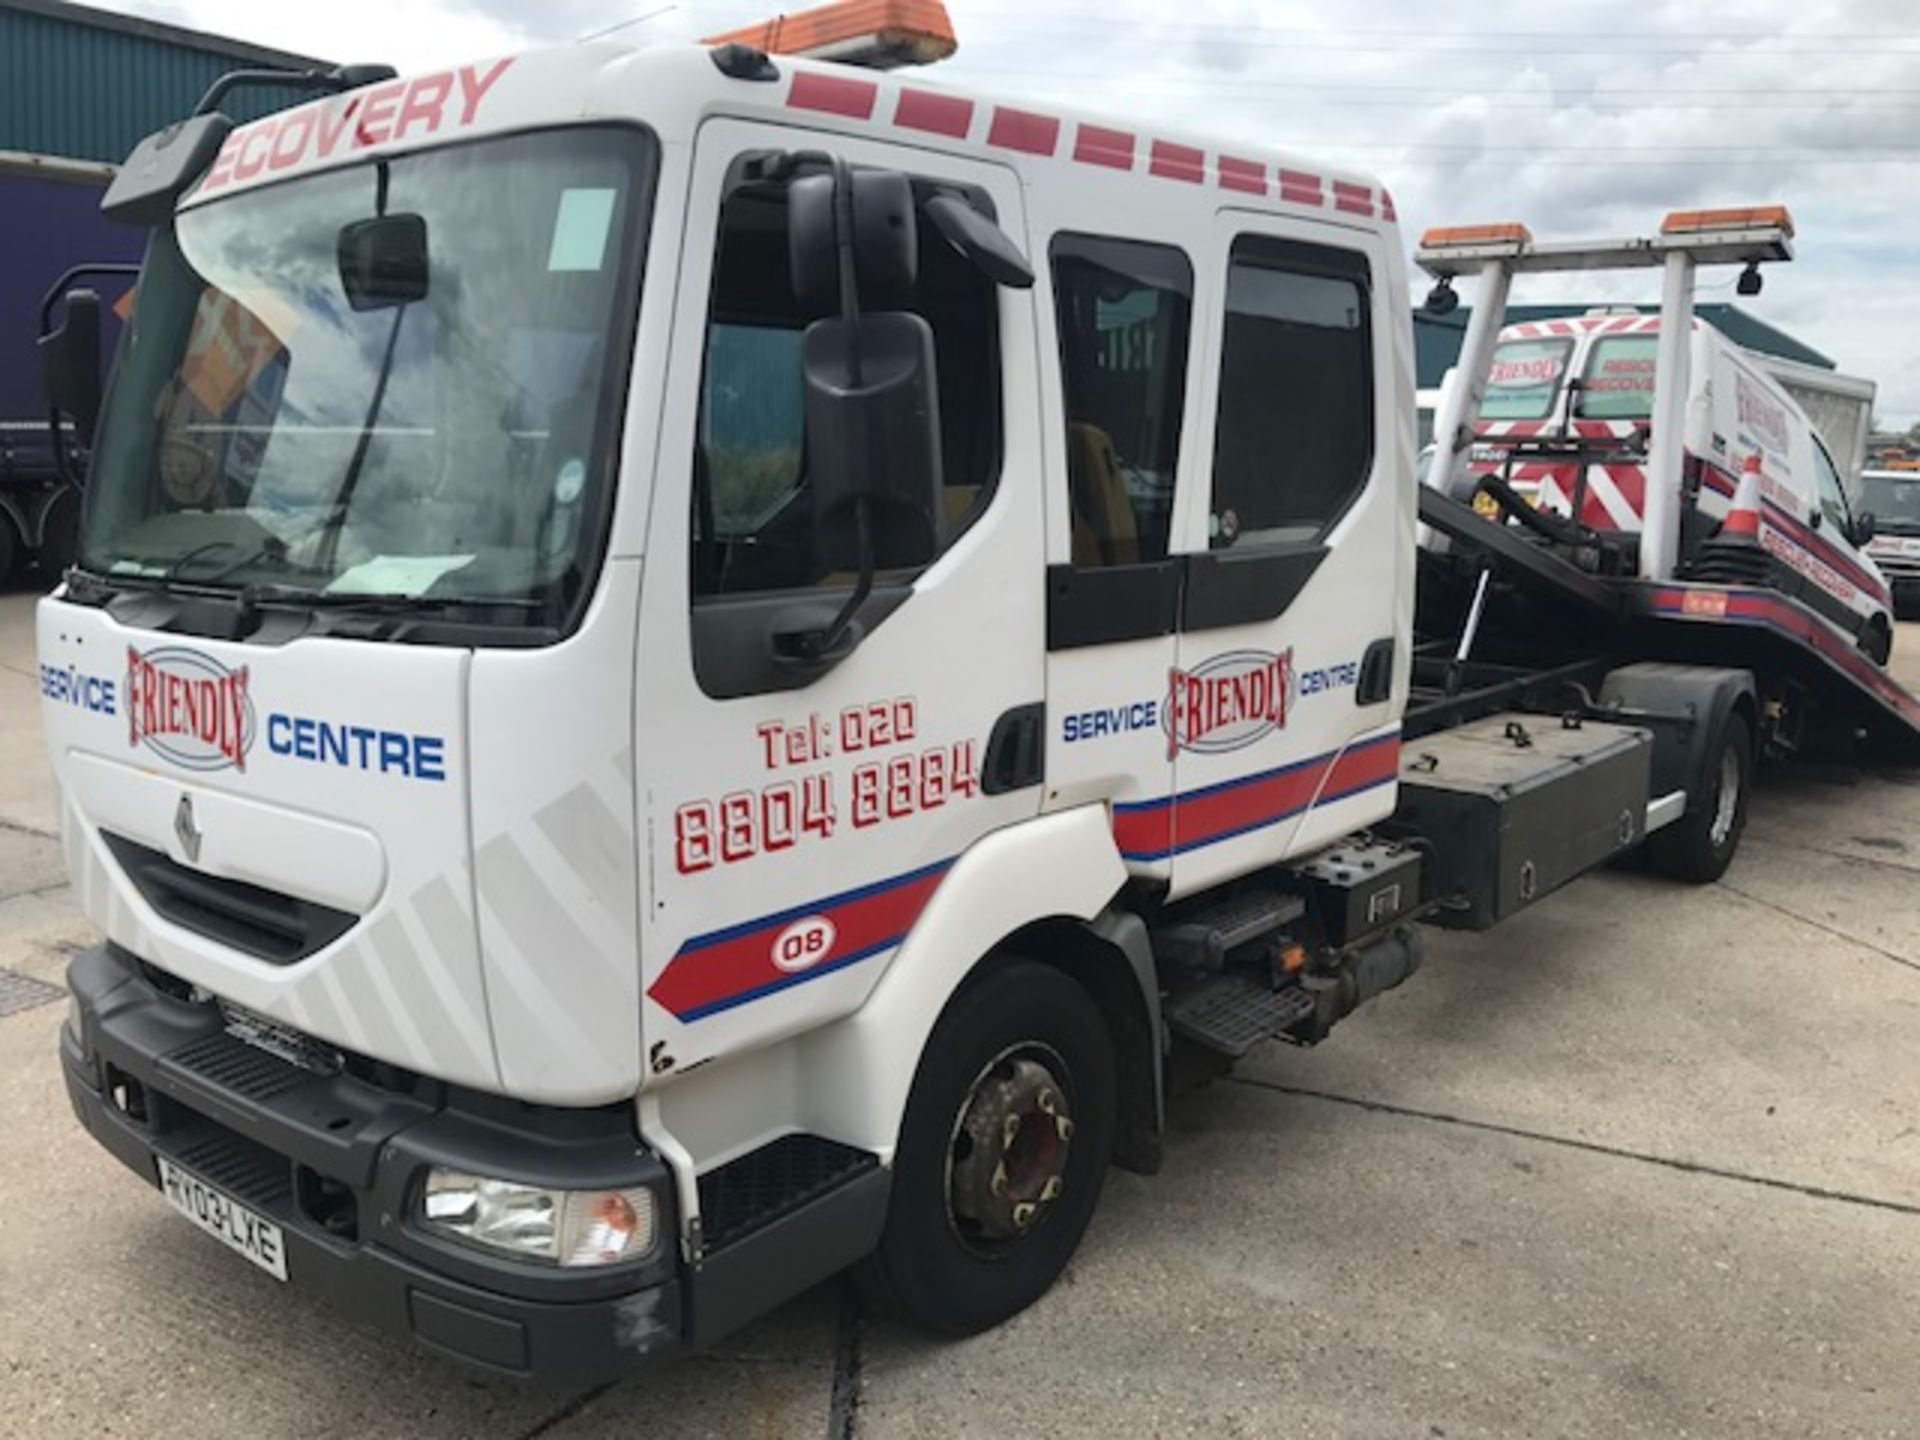 2003 Renault 10t tilt and slide crew cab breakdown recovery vehicle complete with J&J Conversions - Image 2 of 16